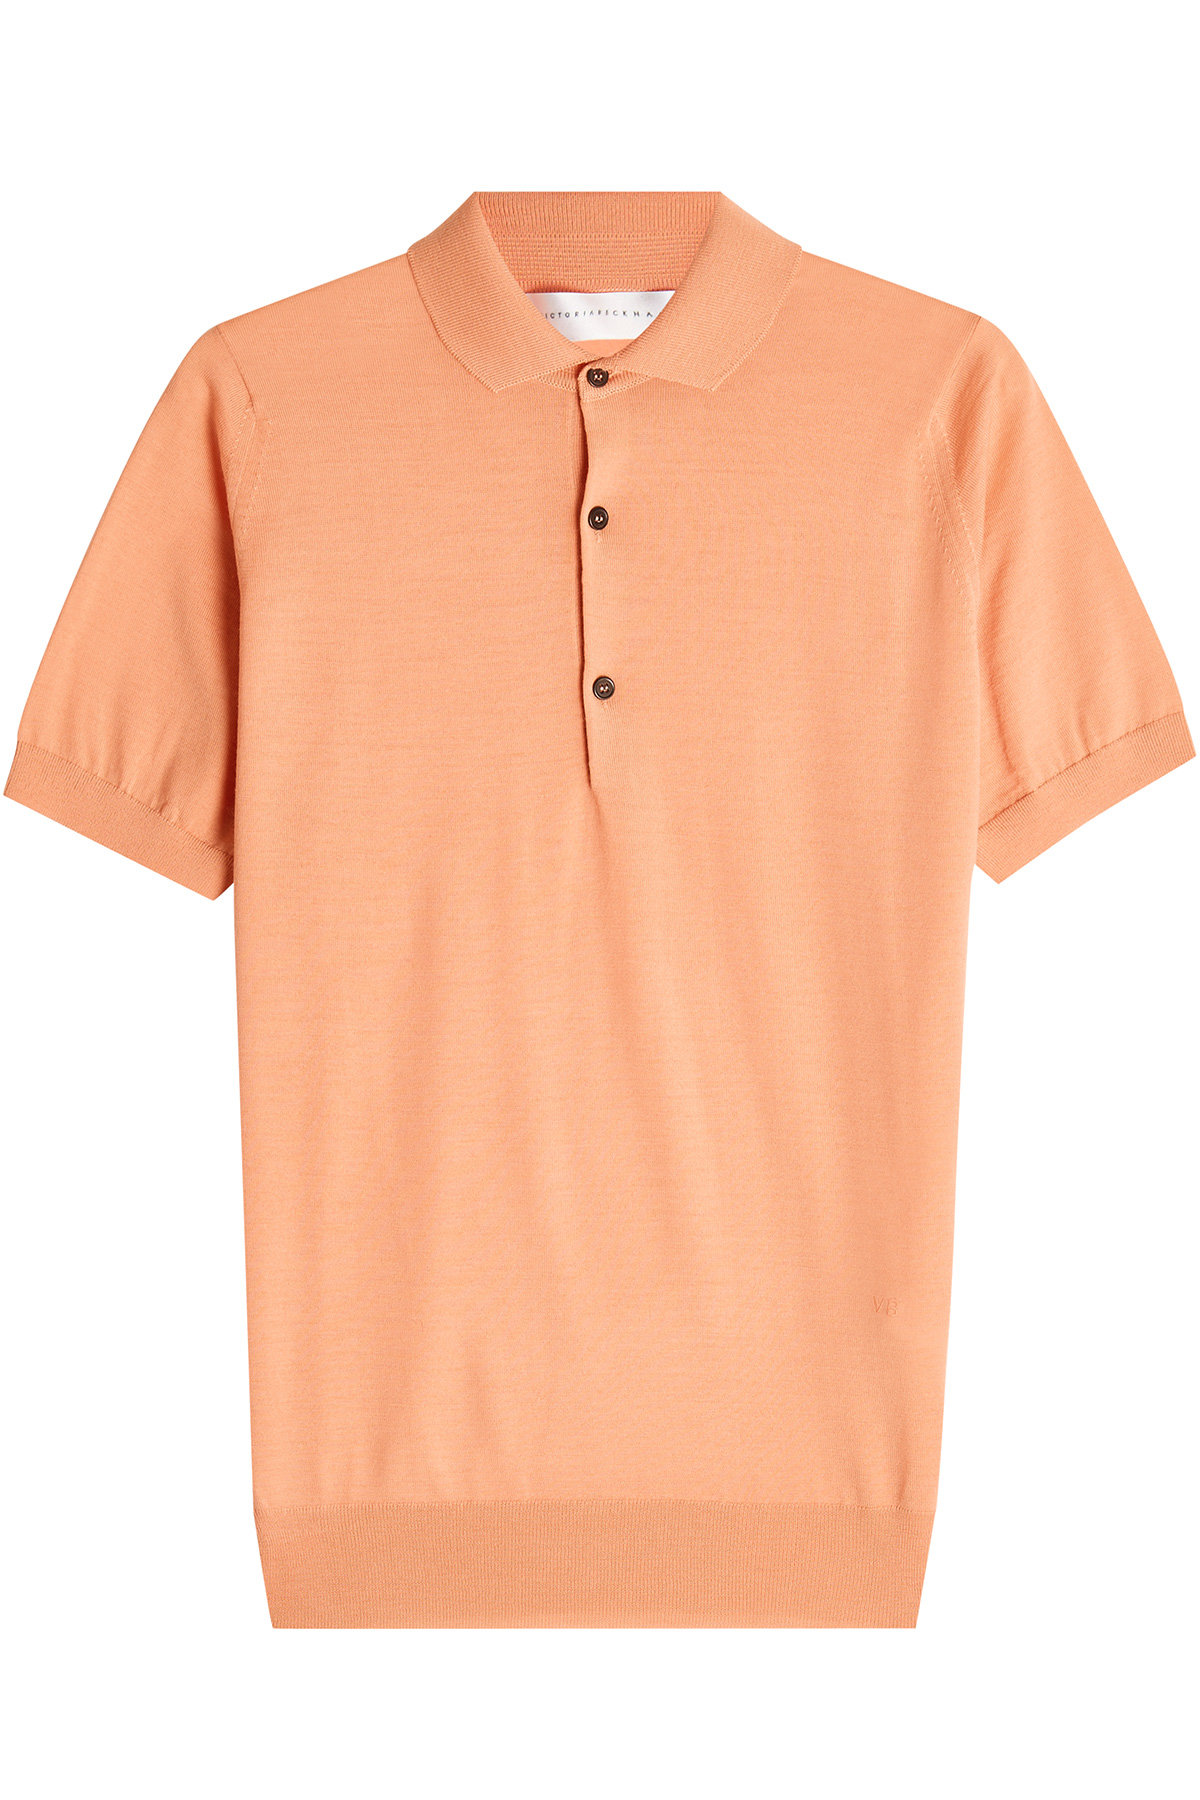 Virgin Wool Polo Top by Victoria Beckham